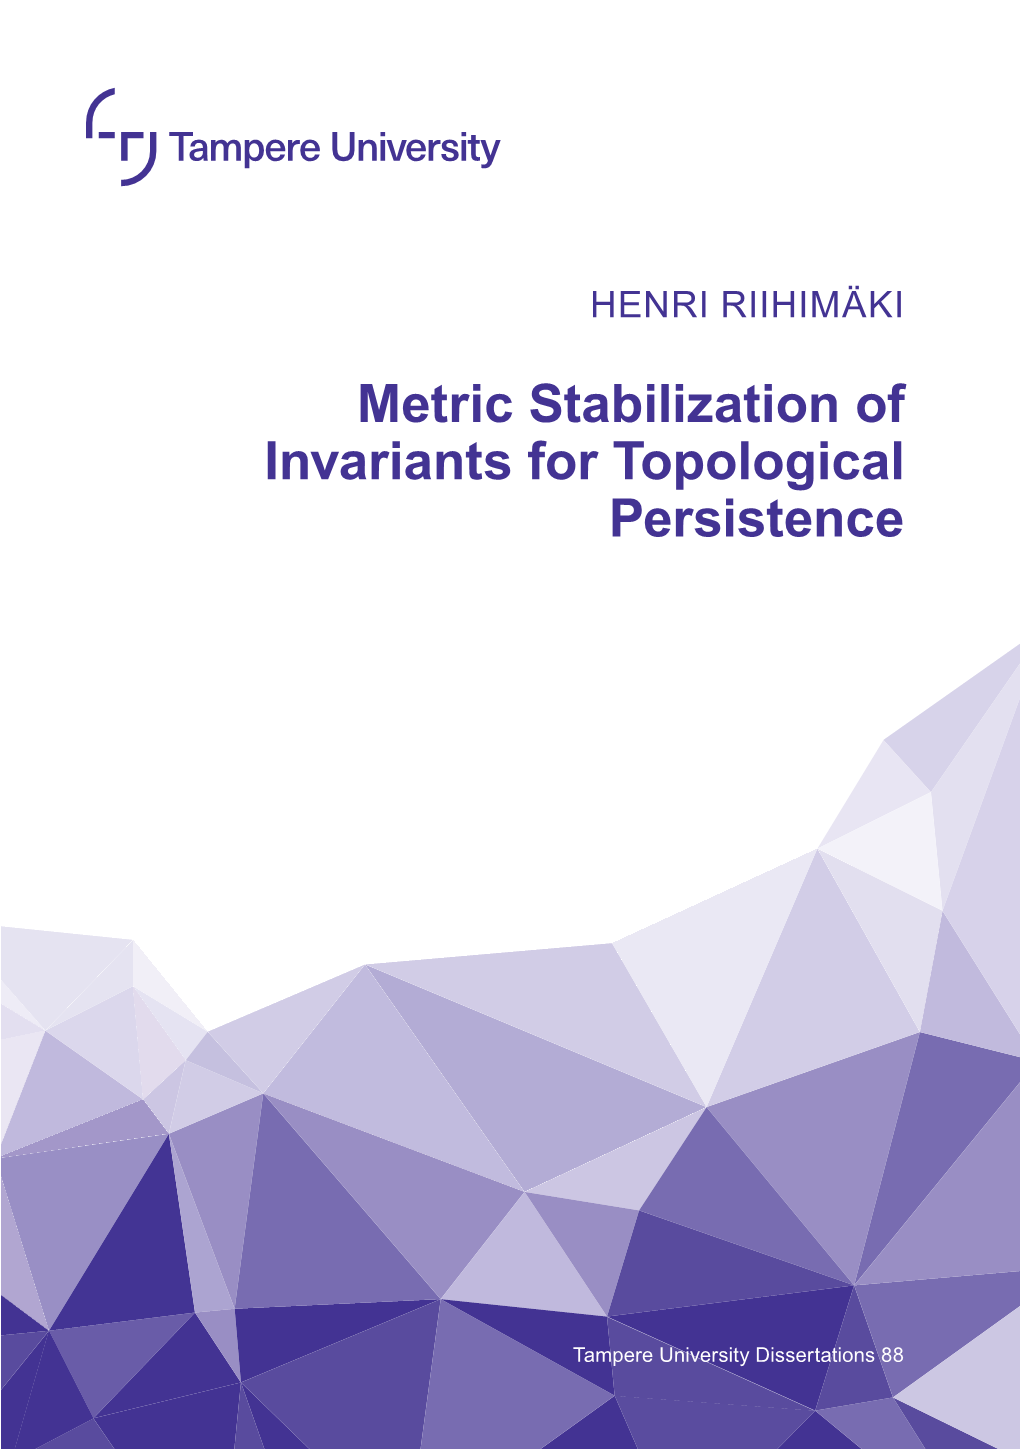 Metric Stabilization of Invariants for Topological Persistence